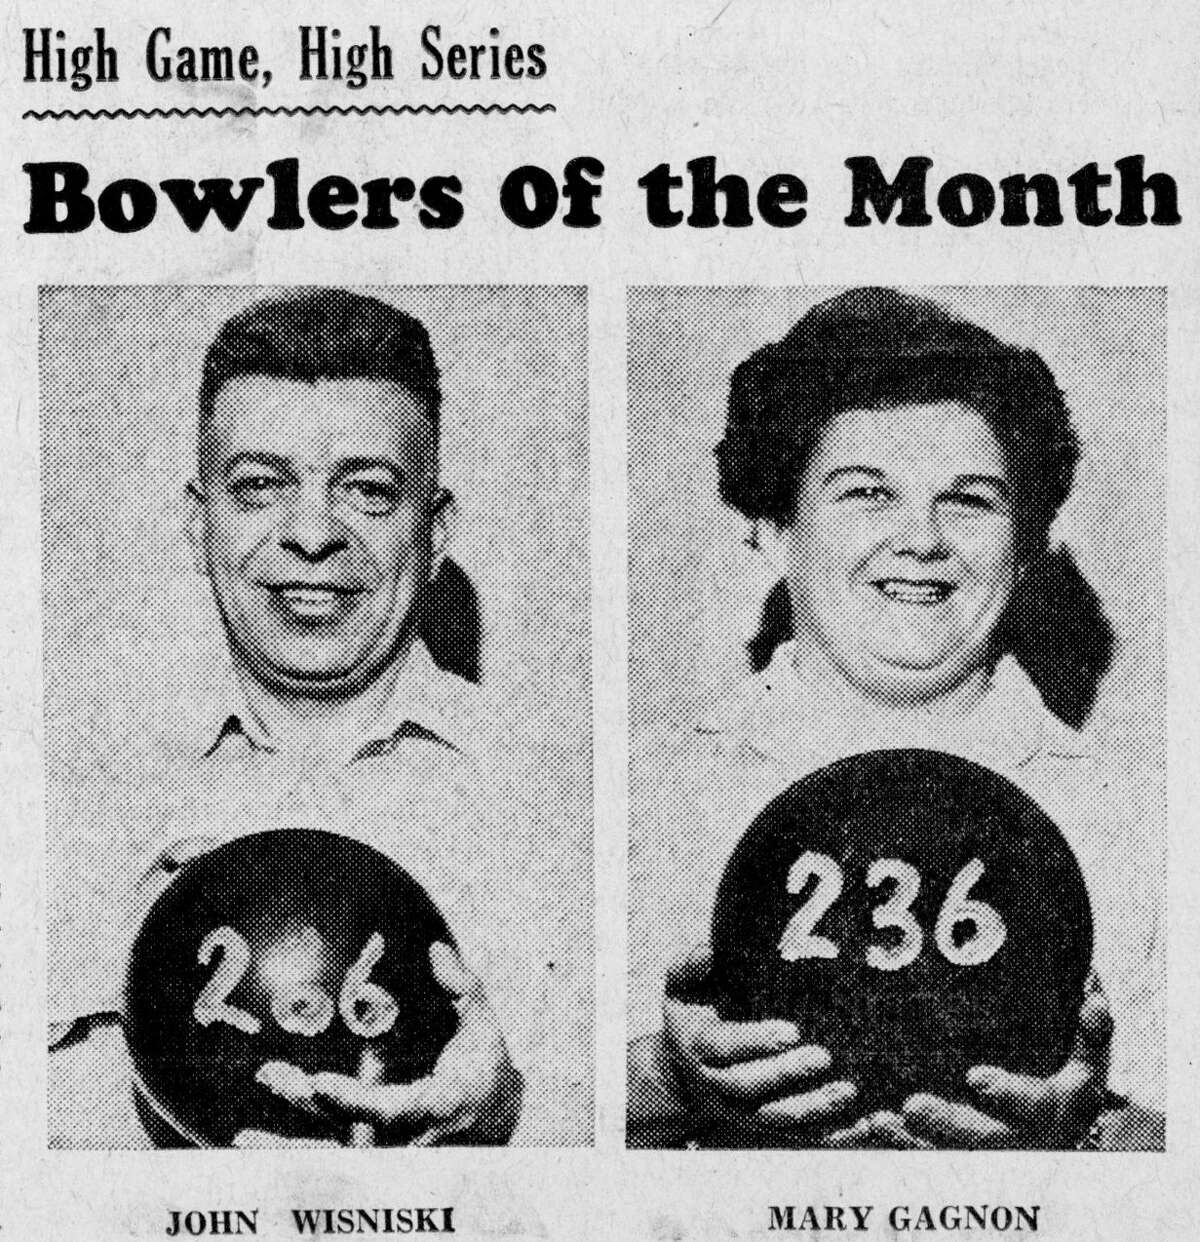 John Wisniski bowled the high single game of October with a high 266 while bowling for the Manistee Welding Team in the commercial league. Mary Gagnon bowled the best single game in the women's league during October with a fine 236 while competing in the Wonder League. The photos were published in the News Advocate on Nov. 7, 1962.